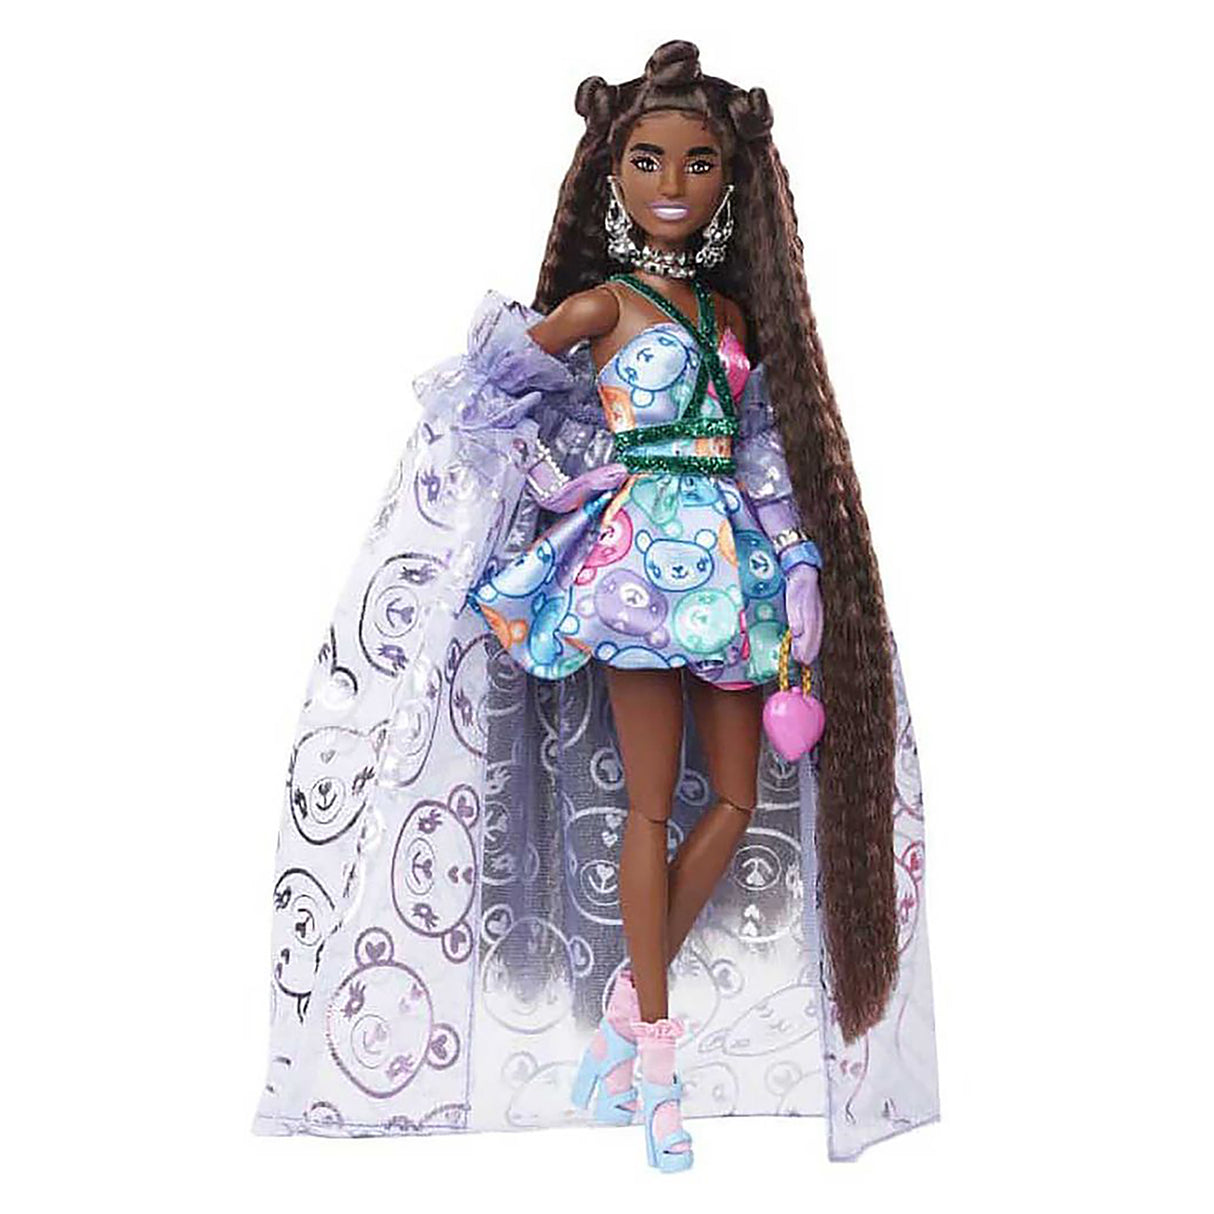 Barbie Extra Fancy Doll and Accessories HHN13